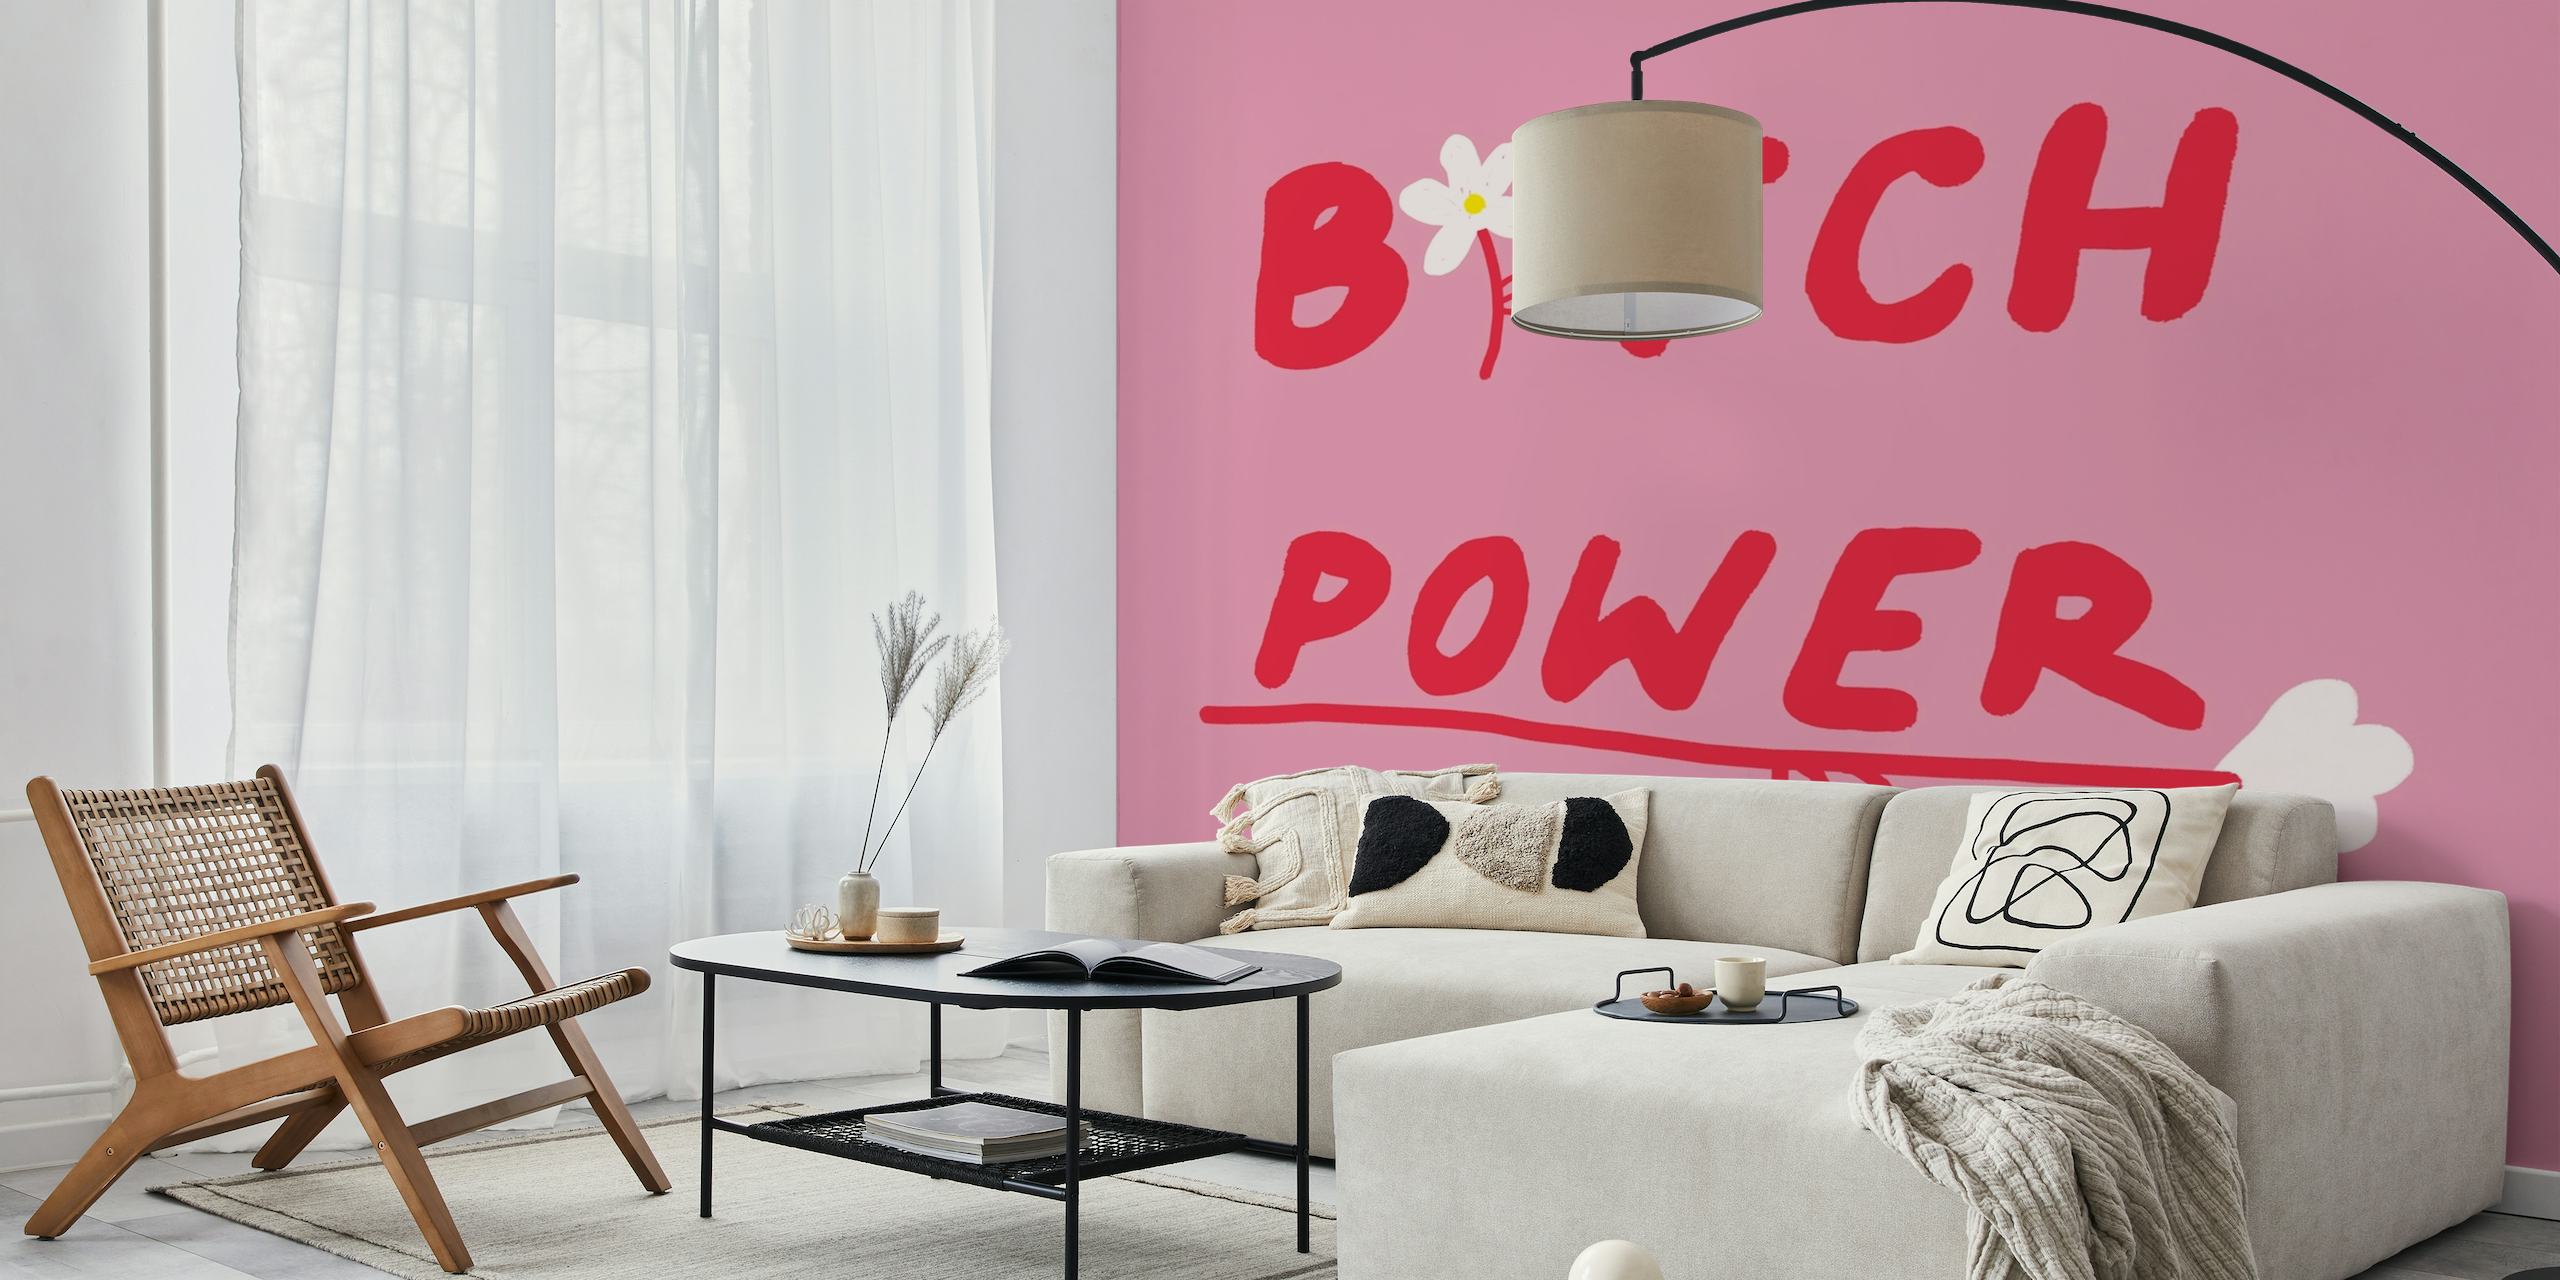 Striking Bitch Power mural featuring bold red and pink hues